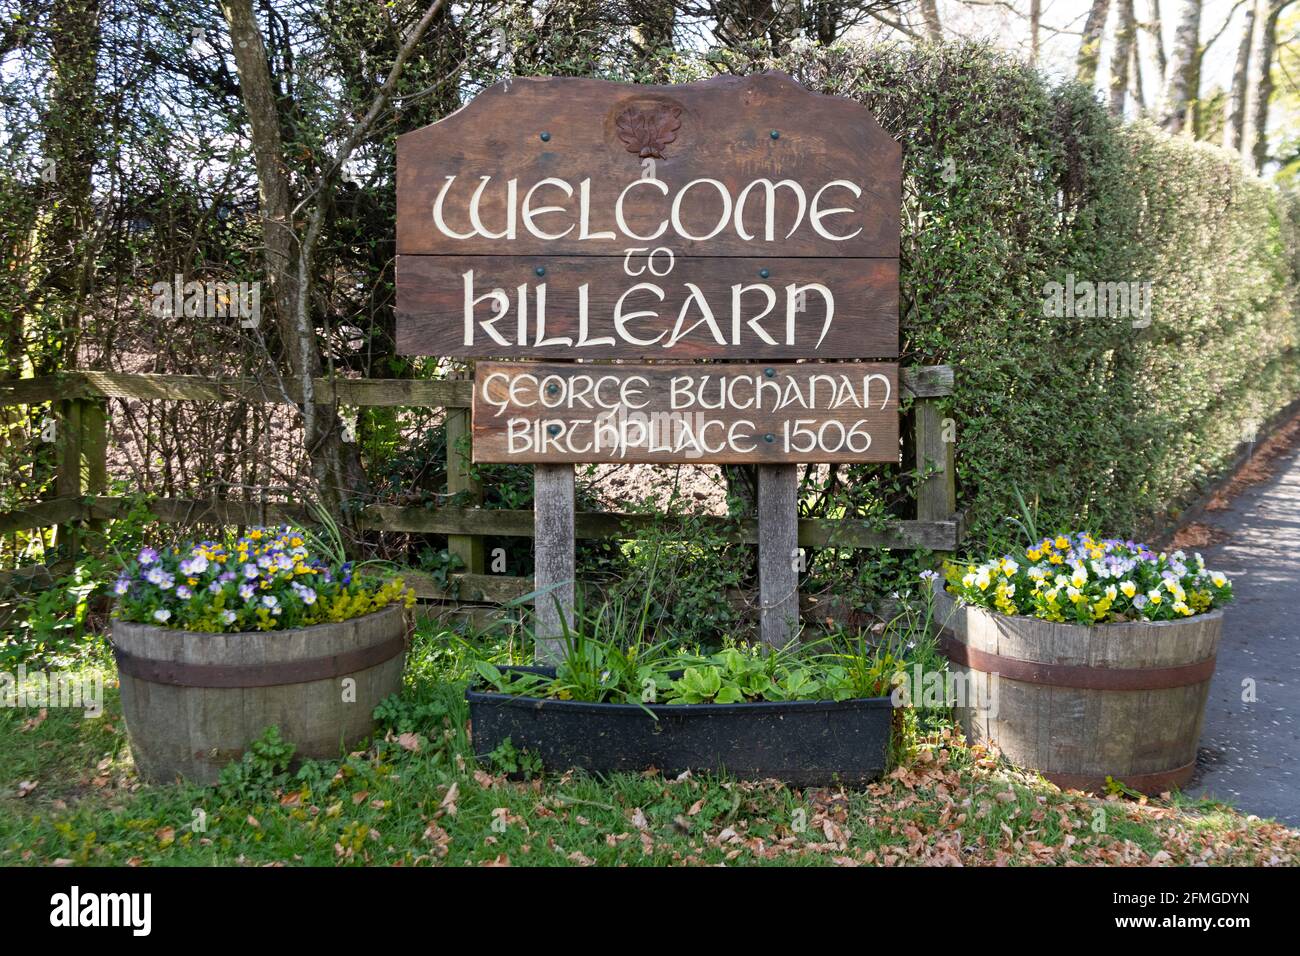 Welcome to Killearn sign, birthplace of George Buchanan - Killearn, Stirling, Scotland, UK Stock Photo